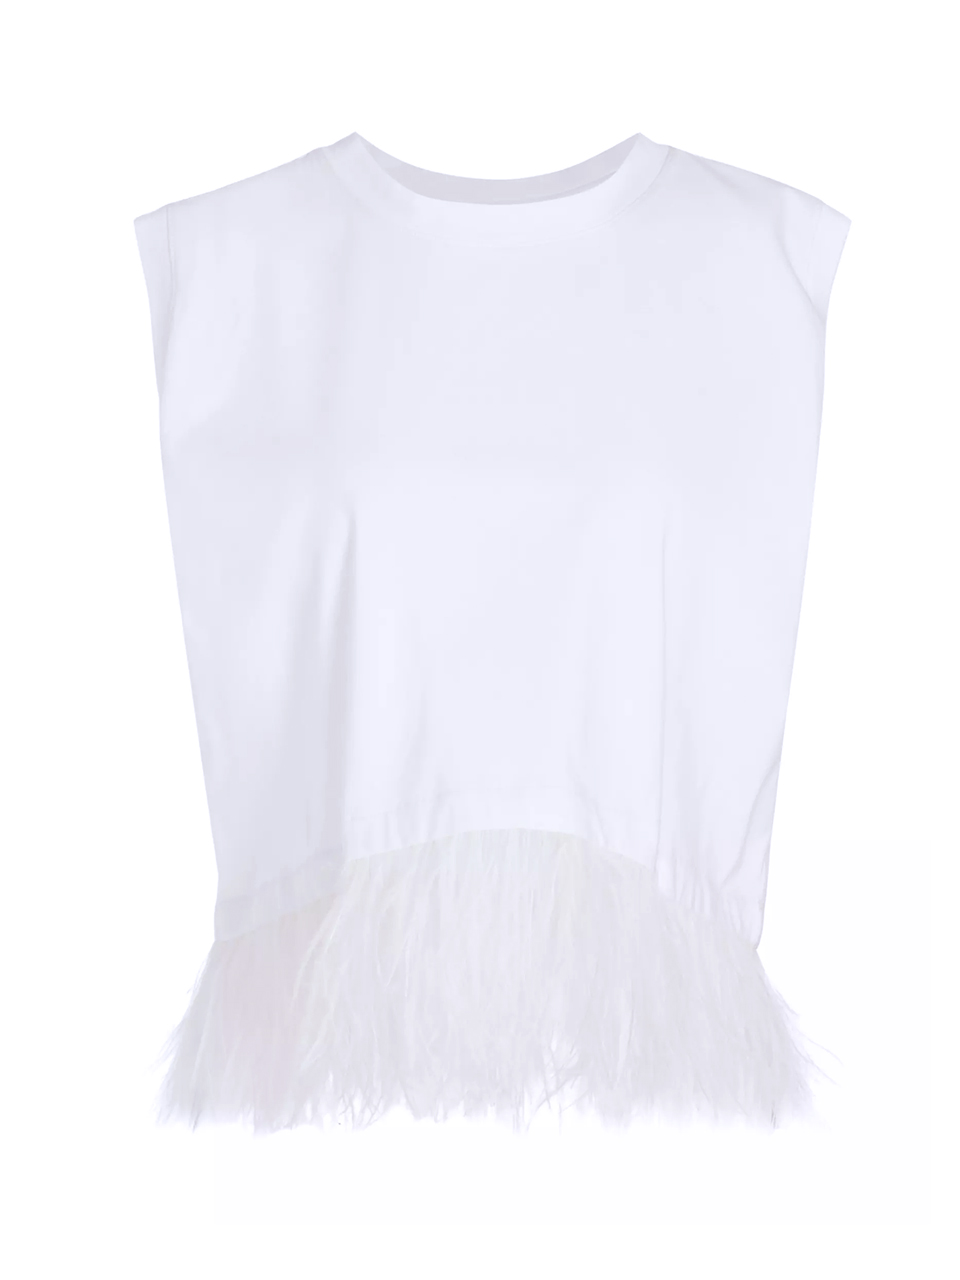 Cinq à Sept Cropped Feather Tee in White Product Shot 